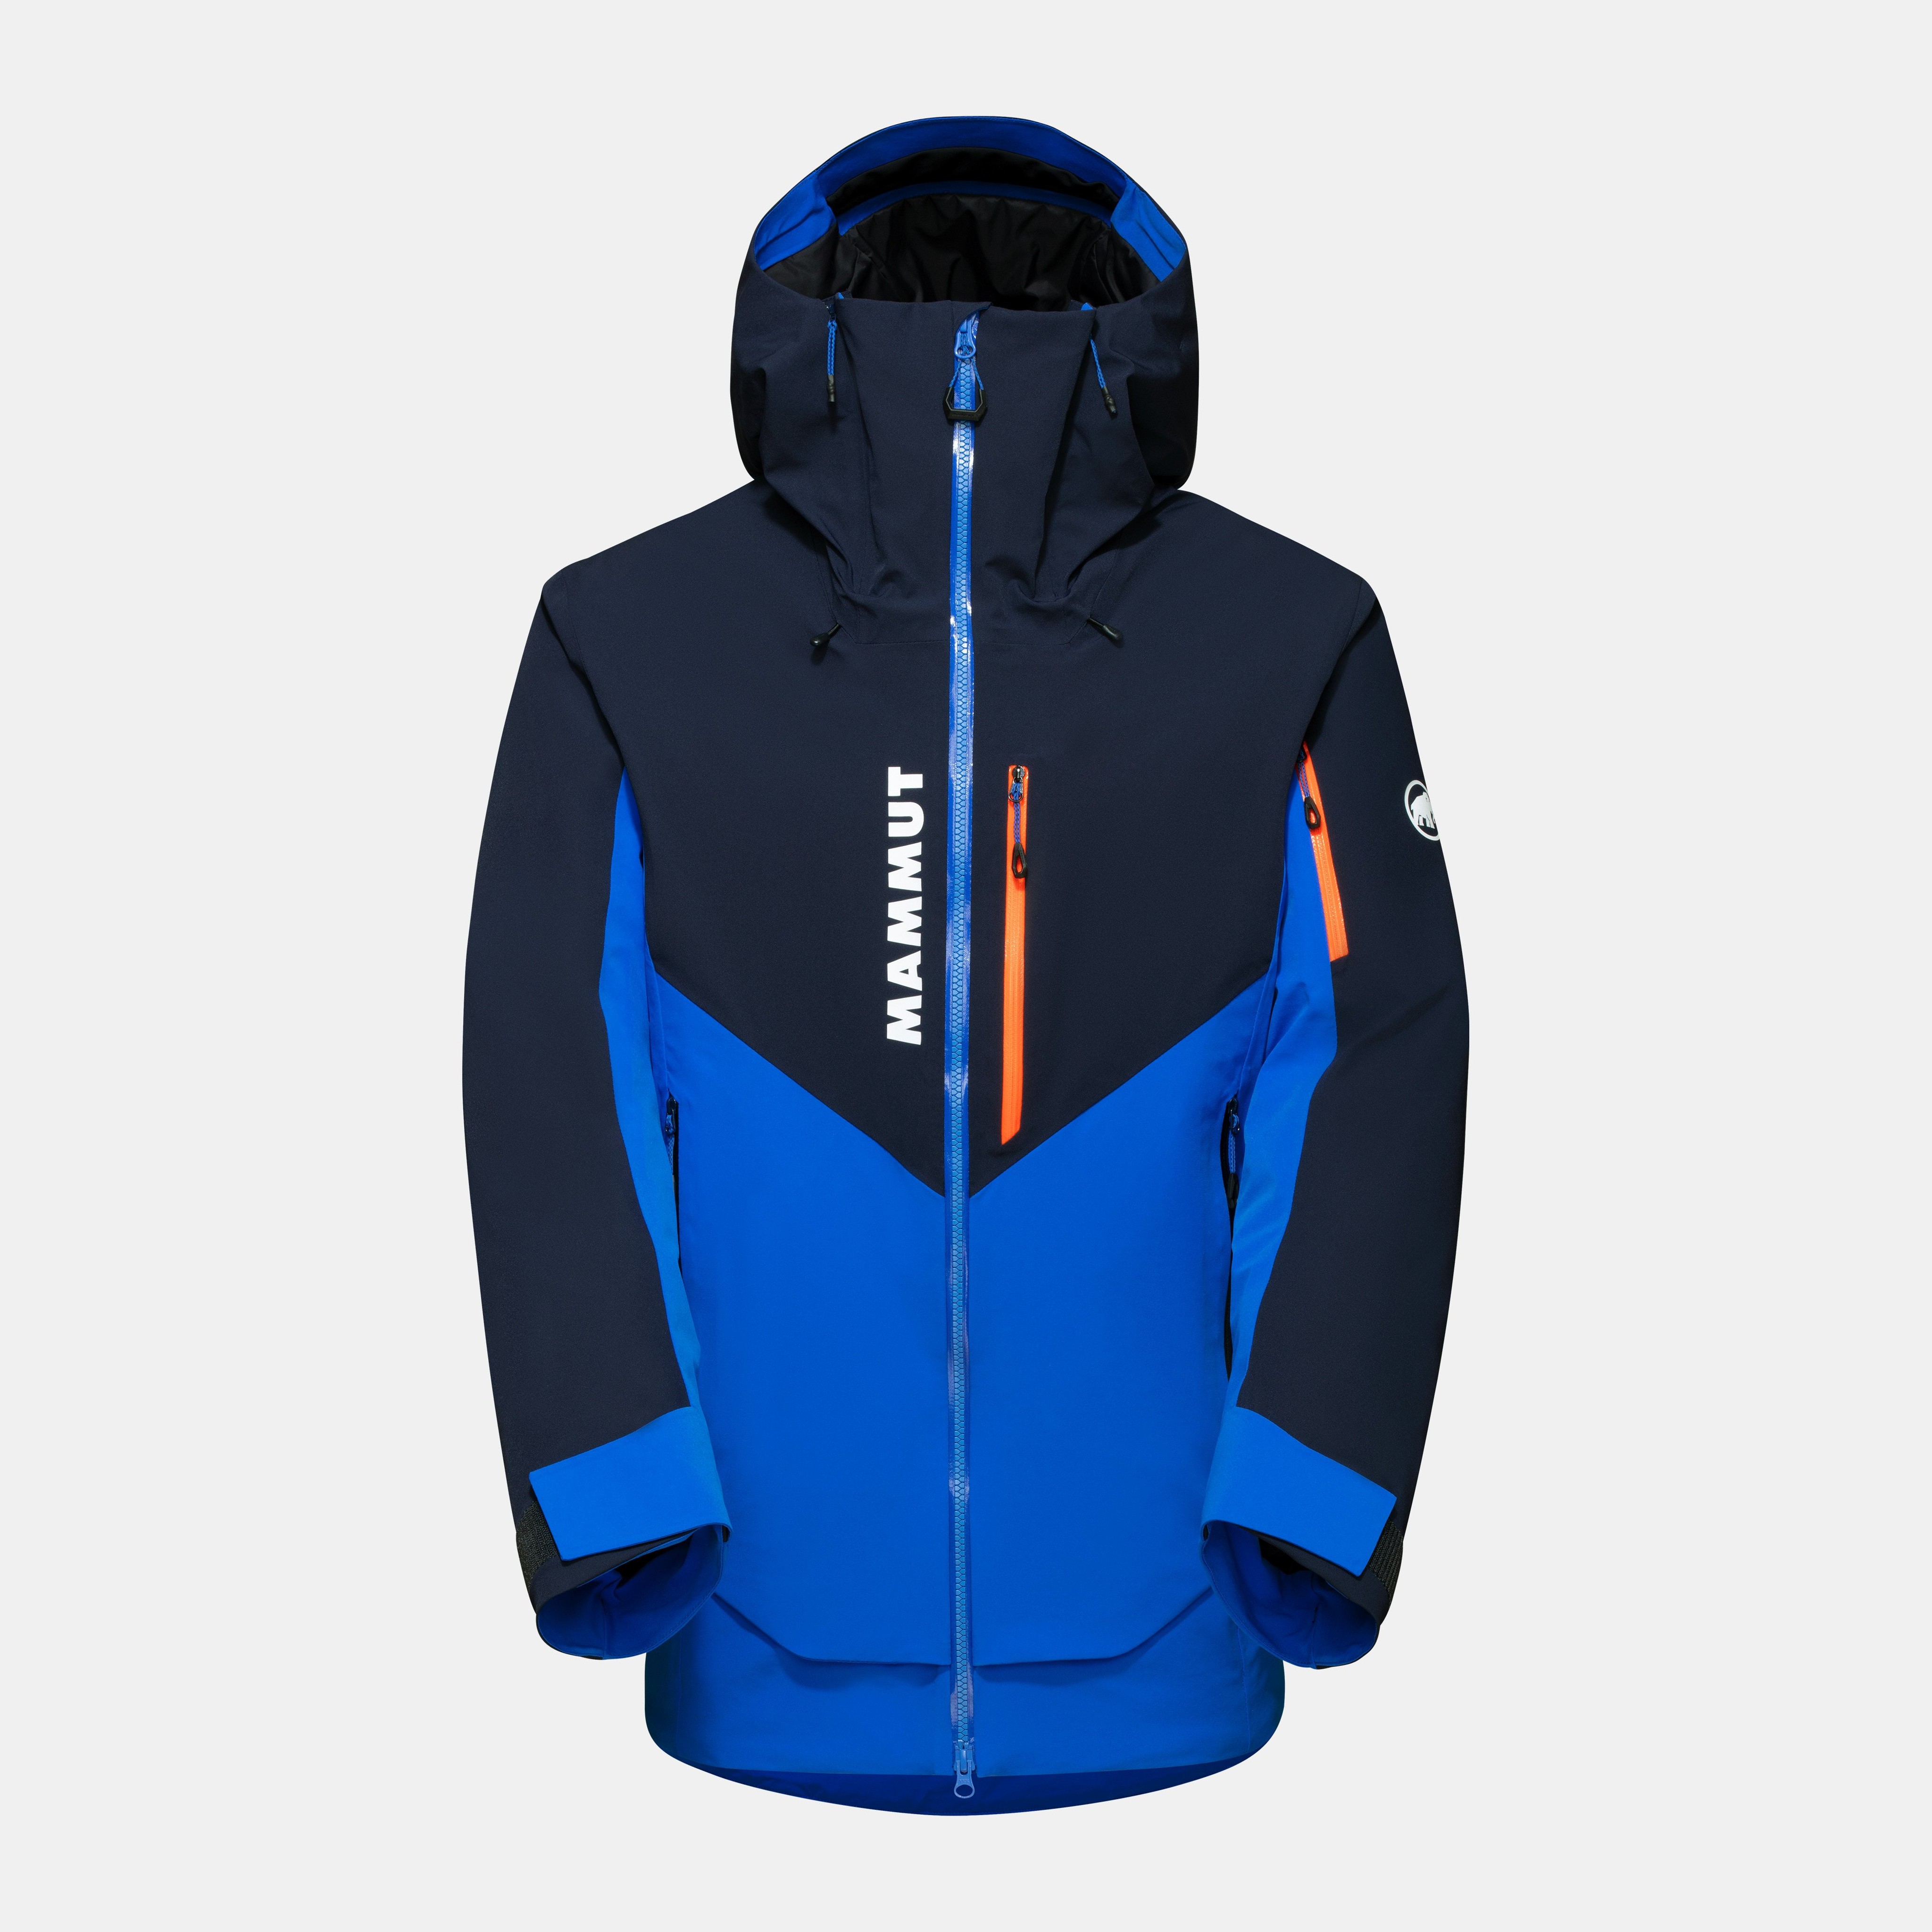 La Liste HS Thermo Hooded Jacket Men product image